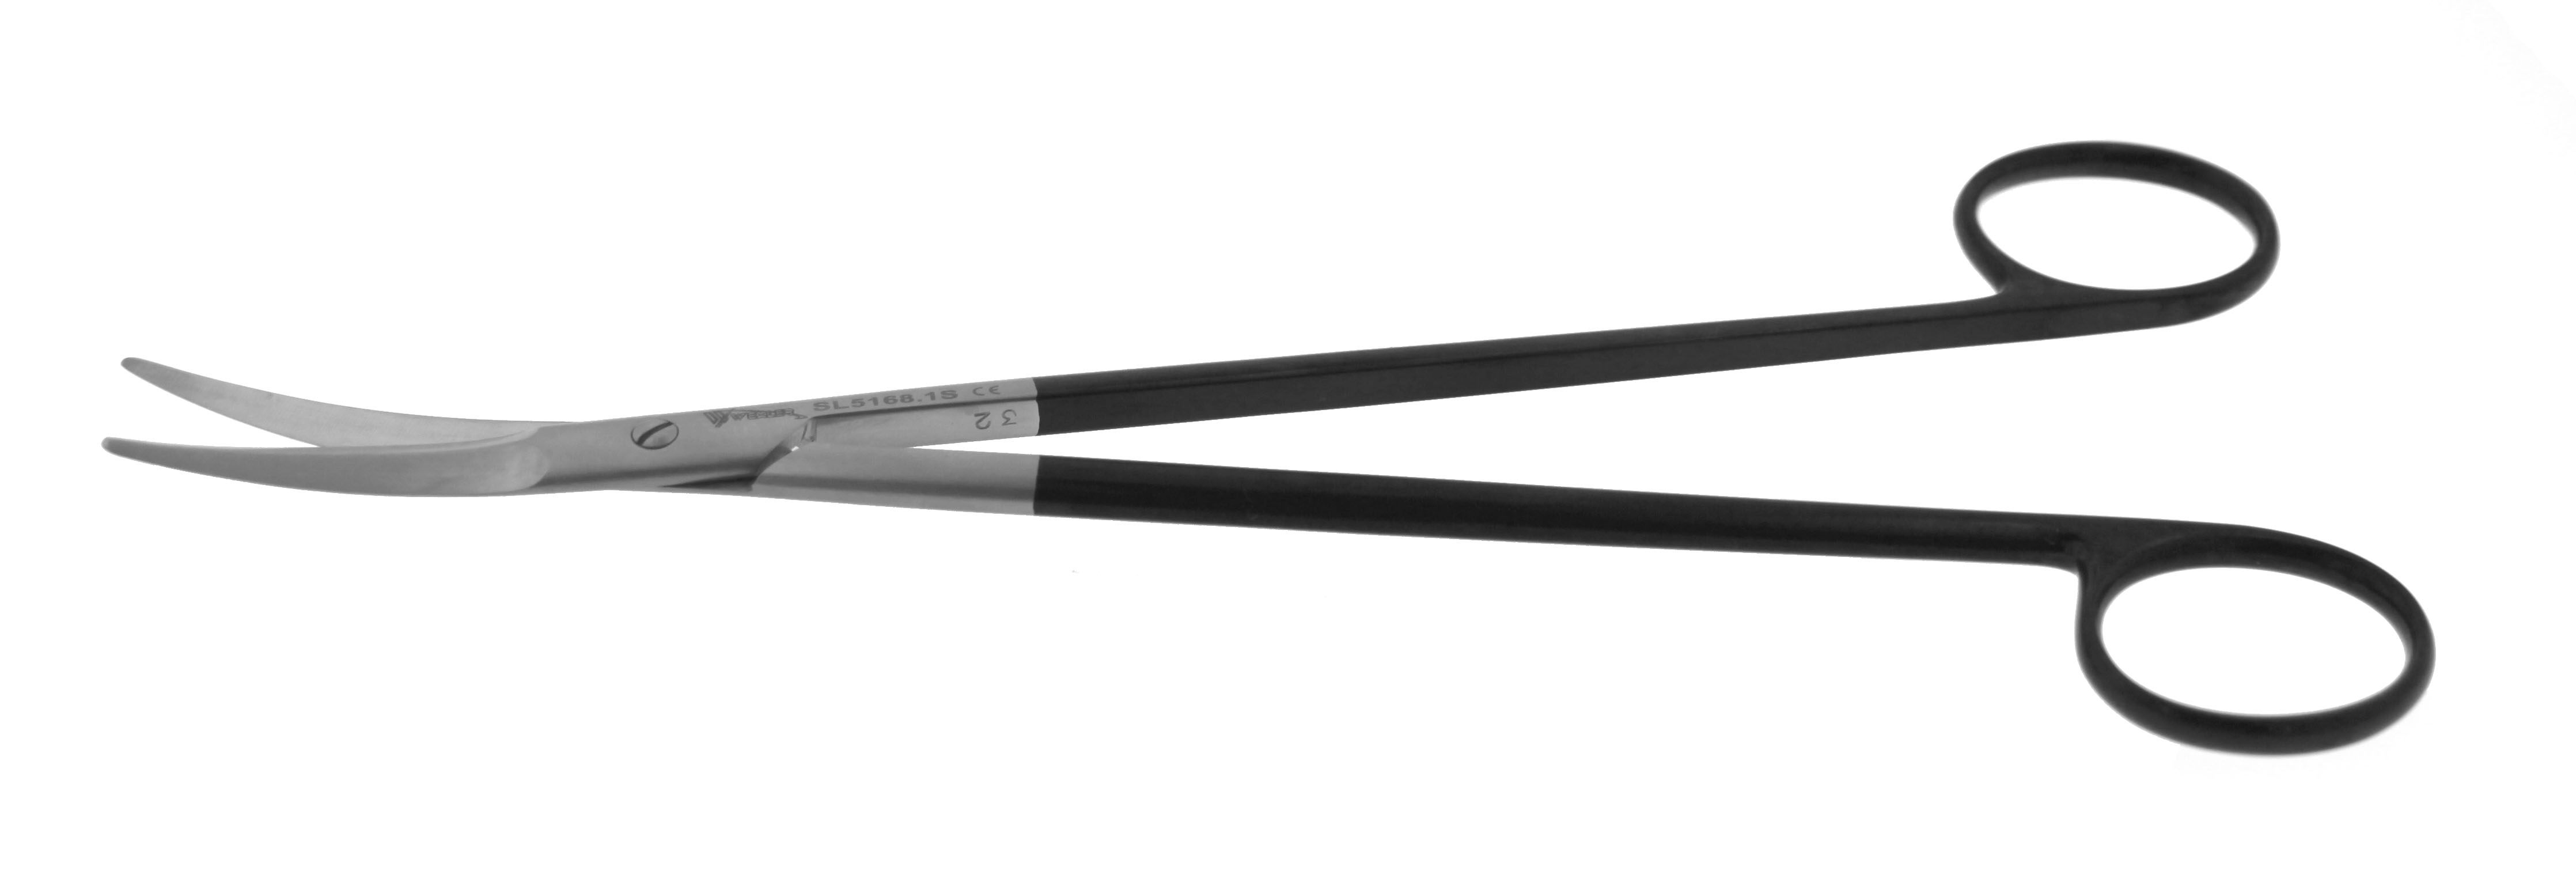 Kaye Face Lift Scissors | Stainless Steel | Surgical Instru